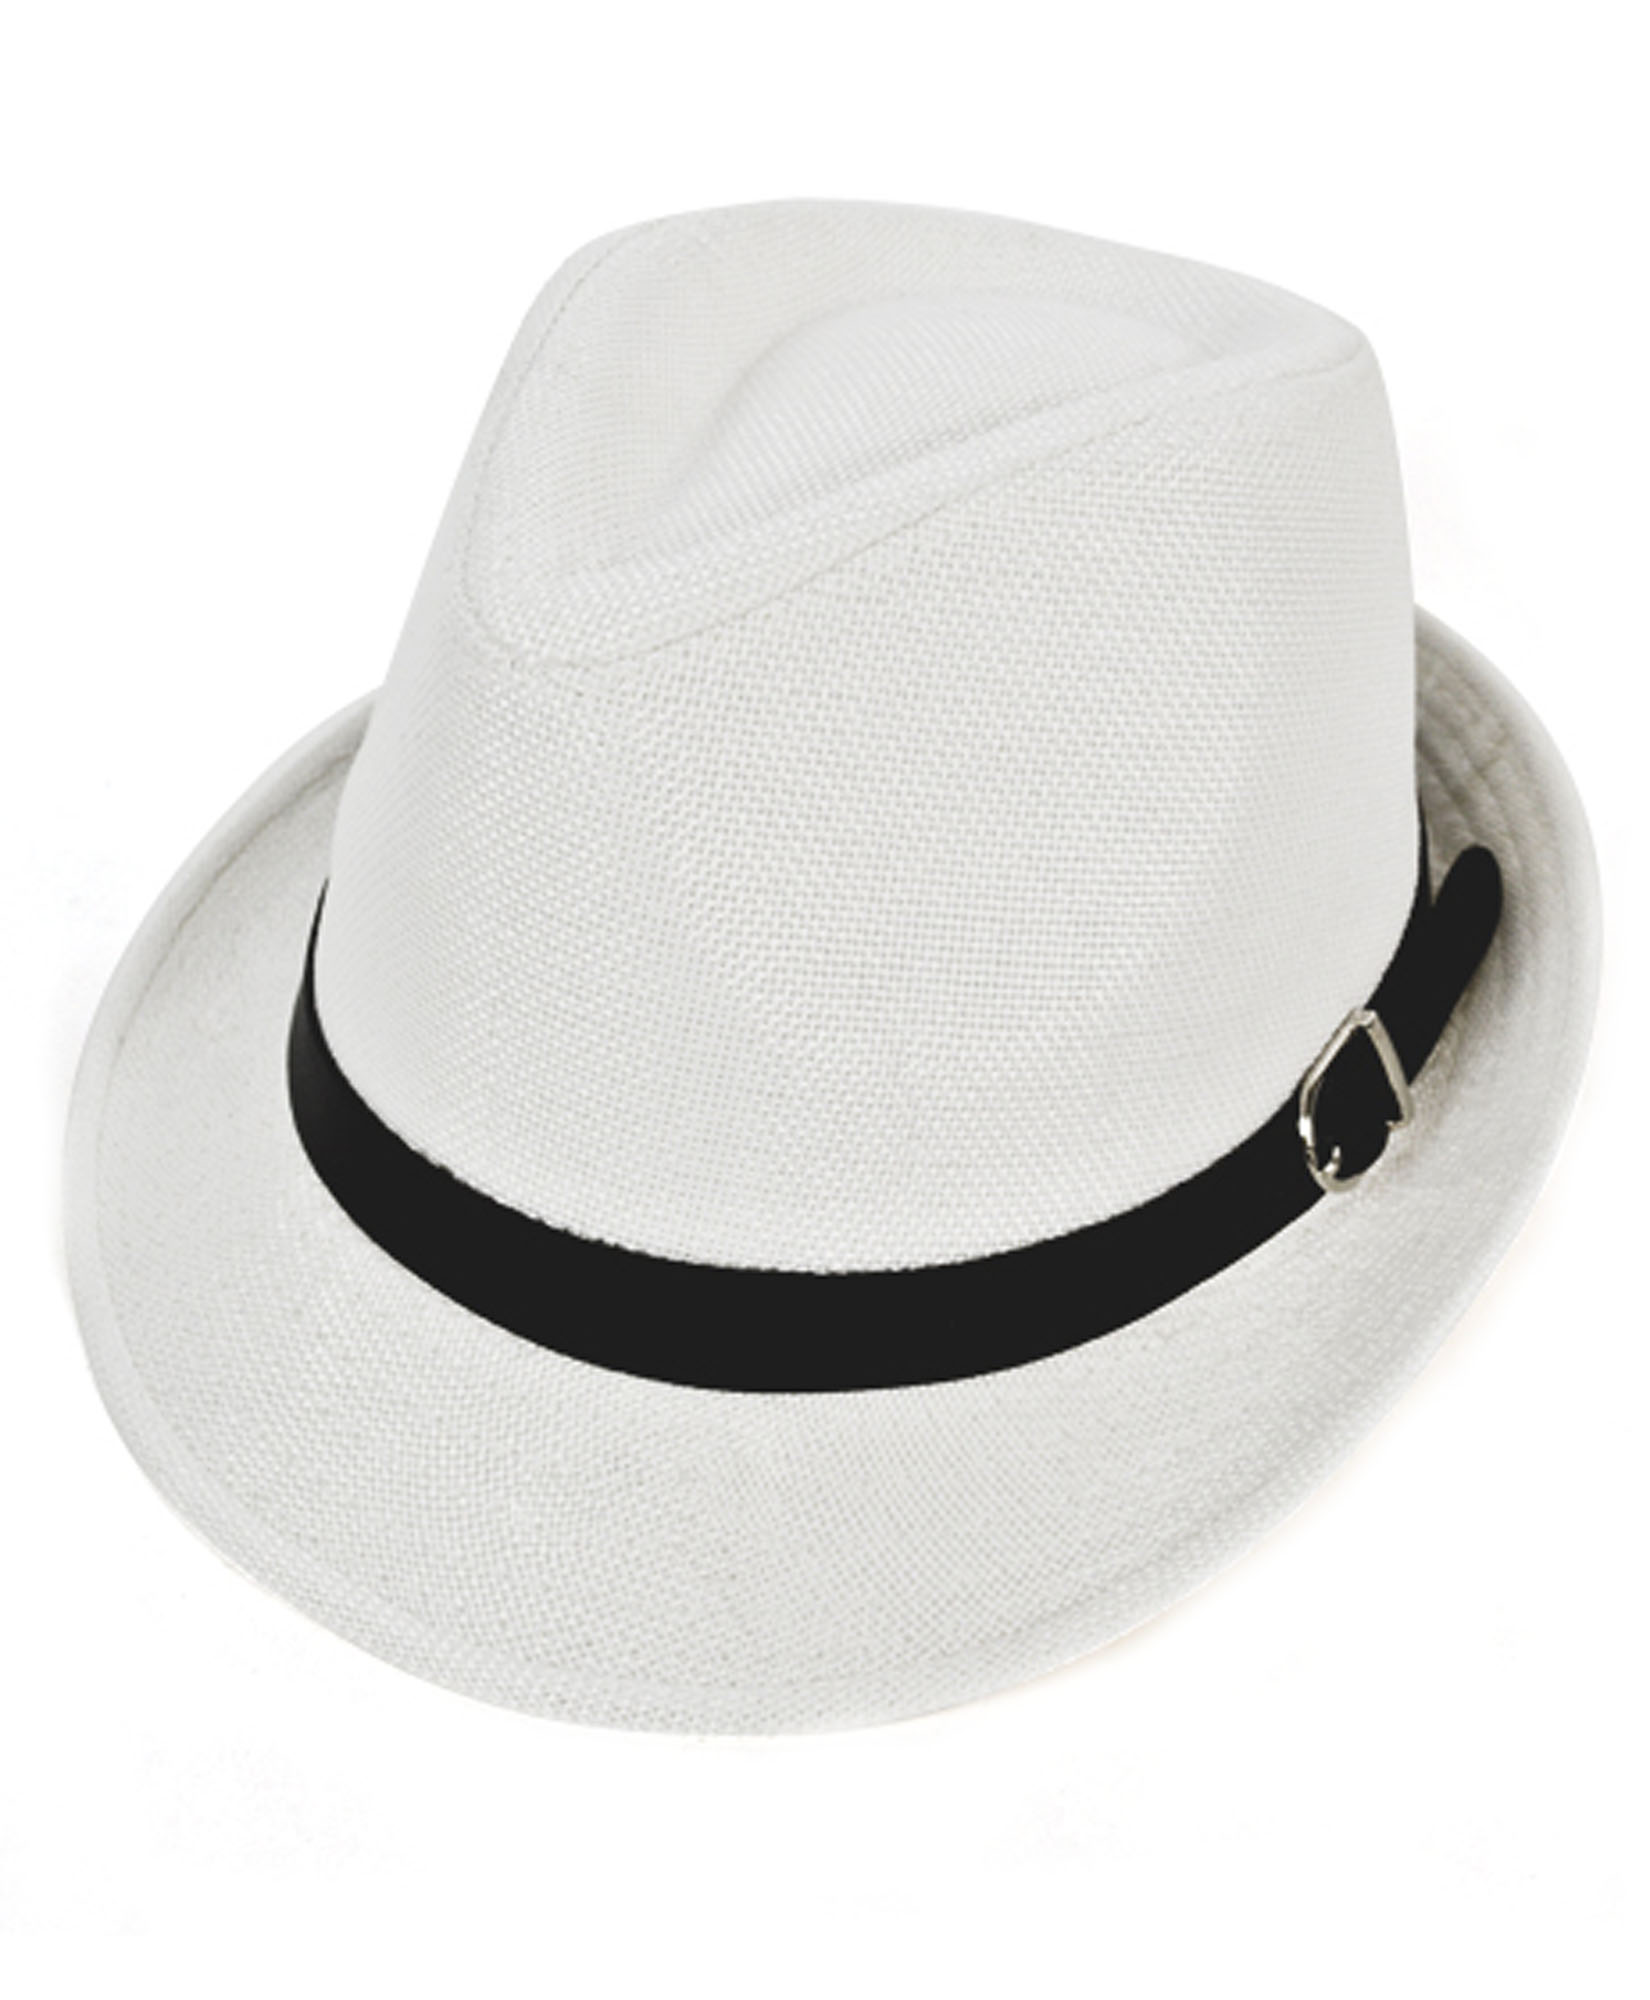 Solid White Fedora Hat with Black Band